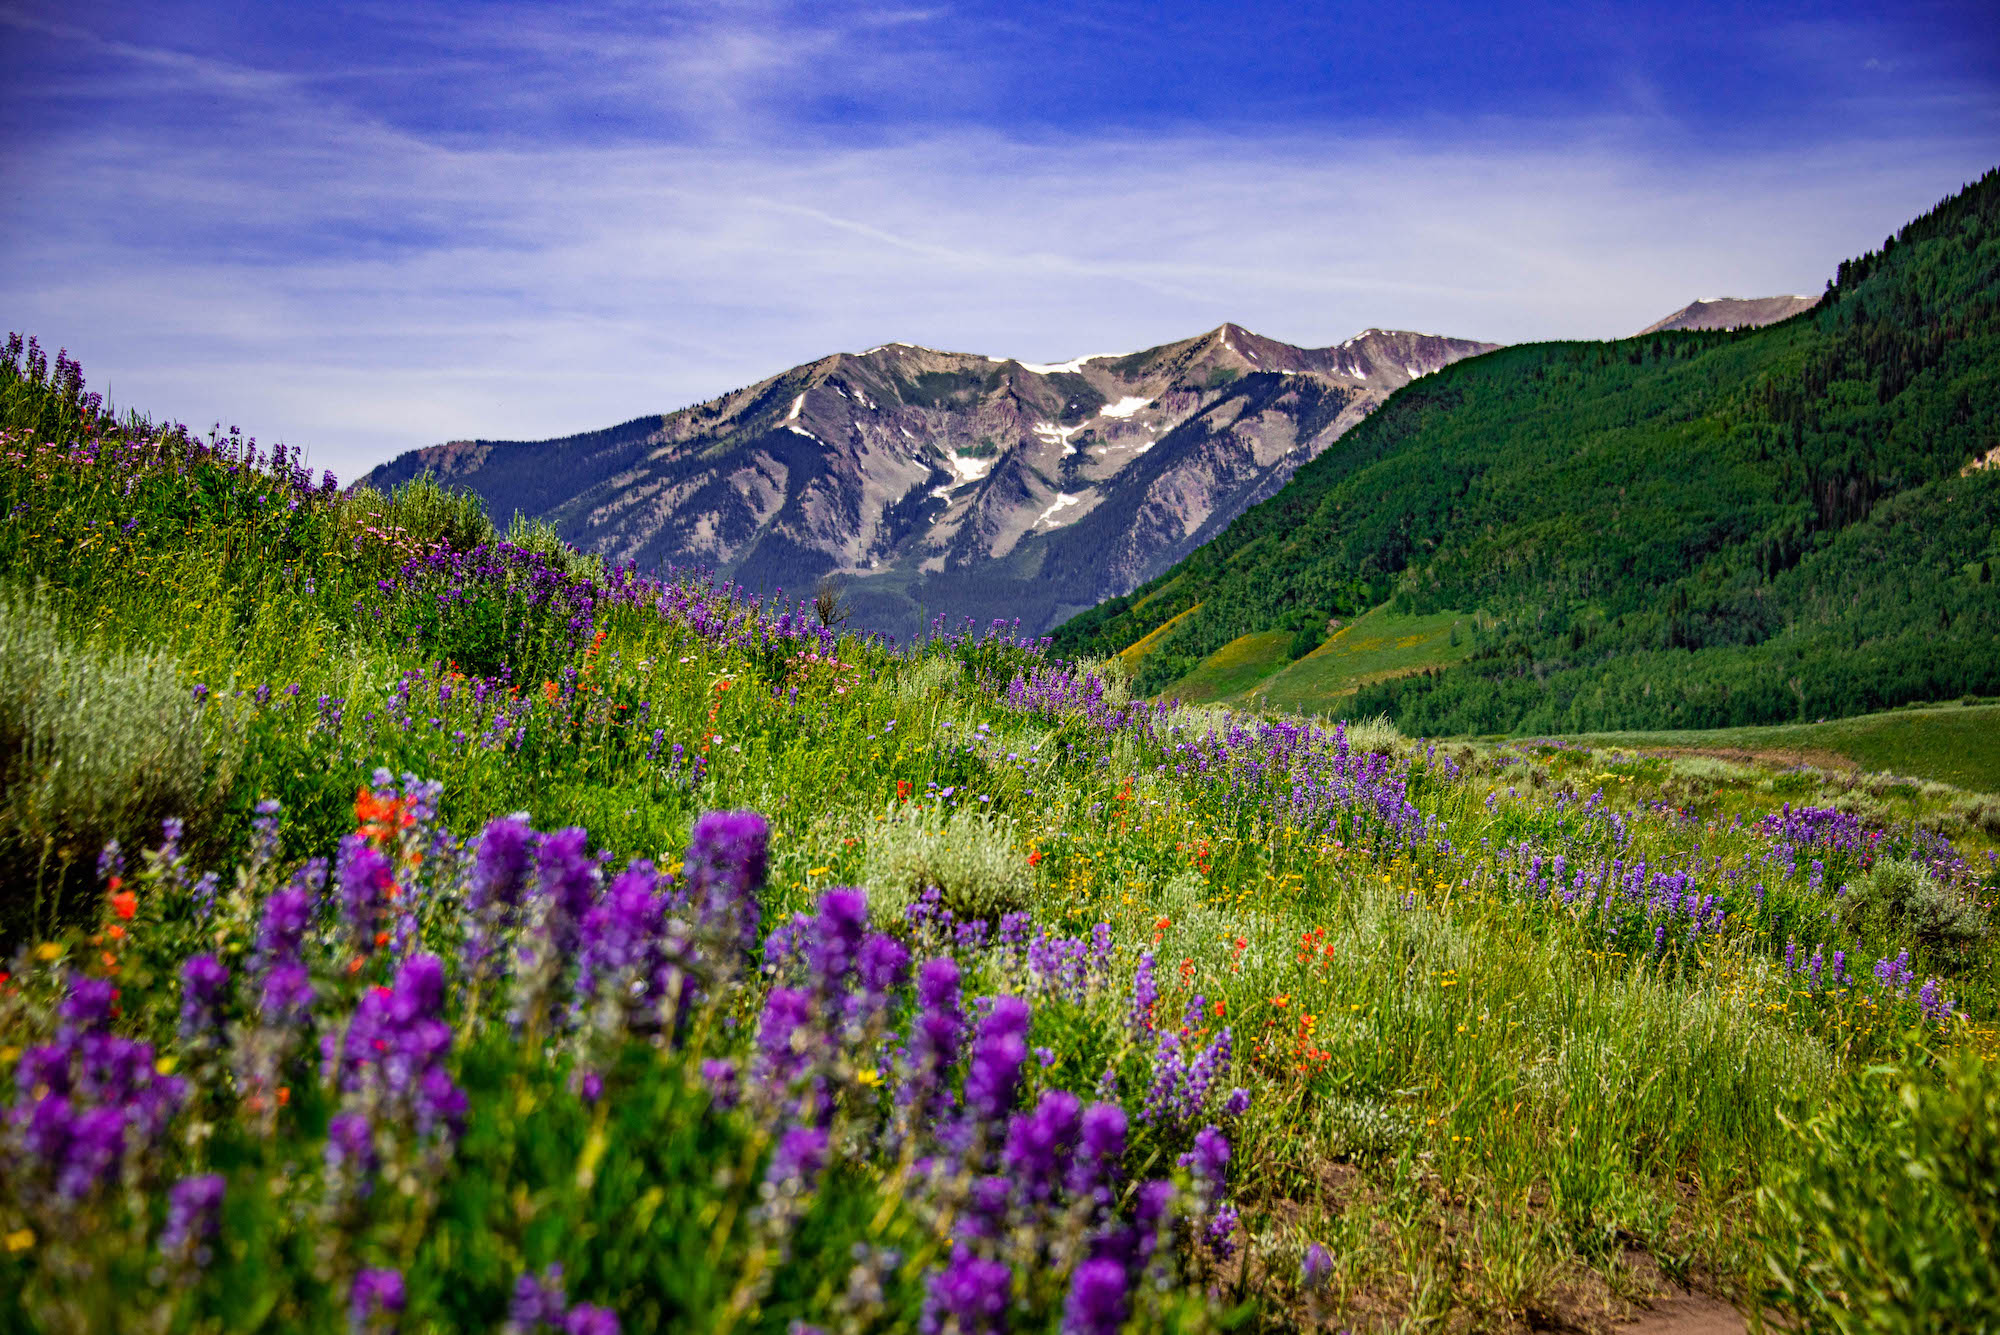 A mountain peak with wildflowers in the foreground. This view is from Teocalli Mountain.